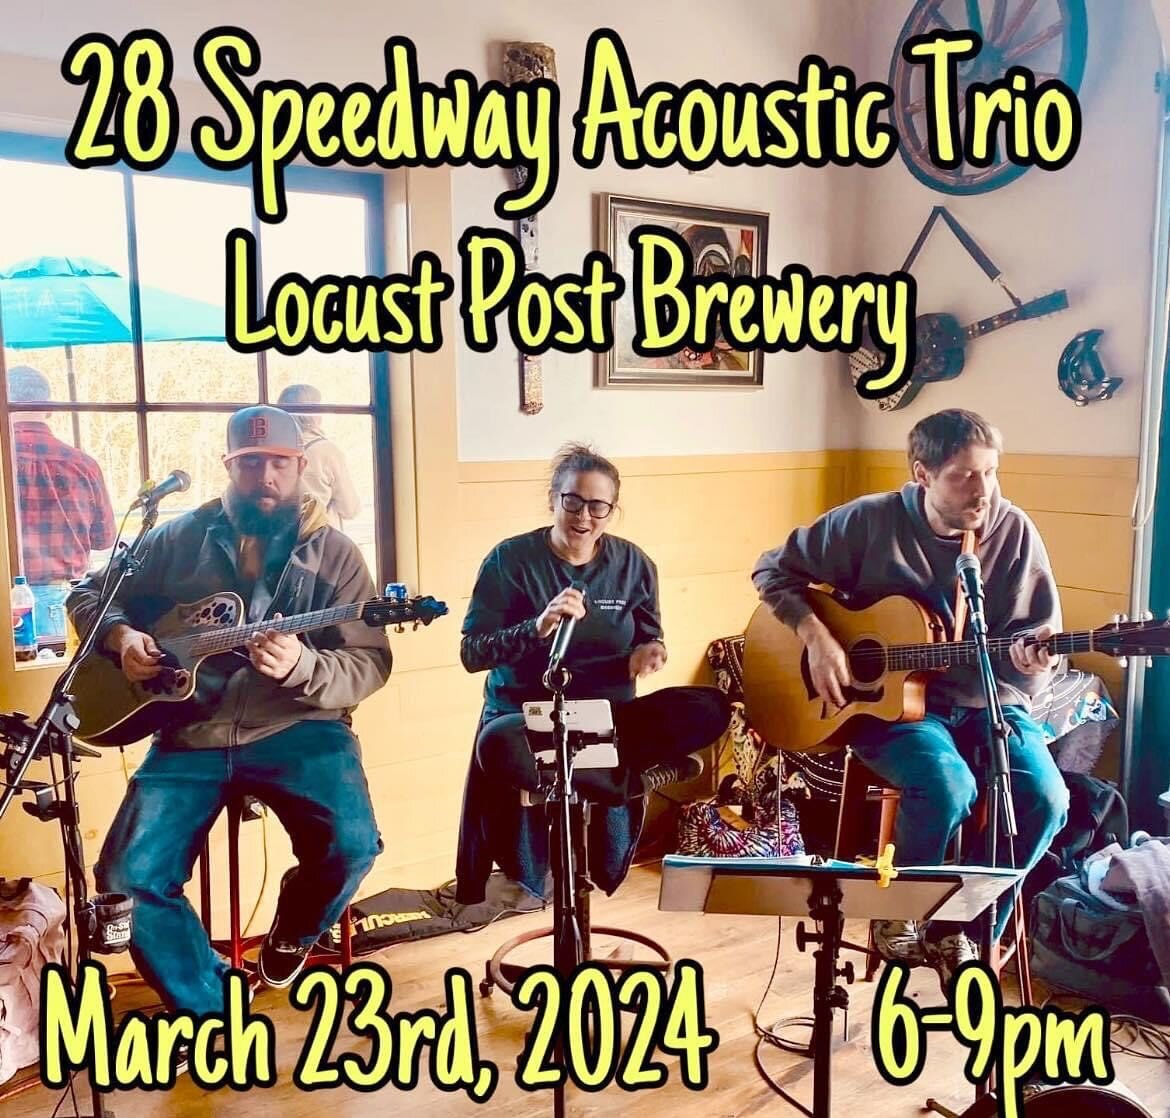 28 Speedway Acoustic Trio will be returning to Locust Post Brewery on March 23rd with a mix of acoustic blues, rock, and country. Spring into the new season with great drinks, food, and music! 😎✌️🎶